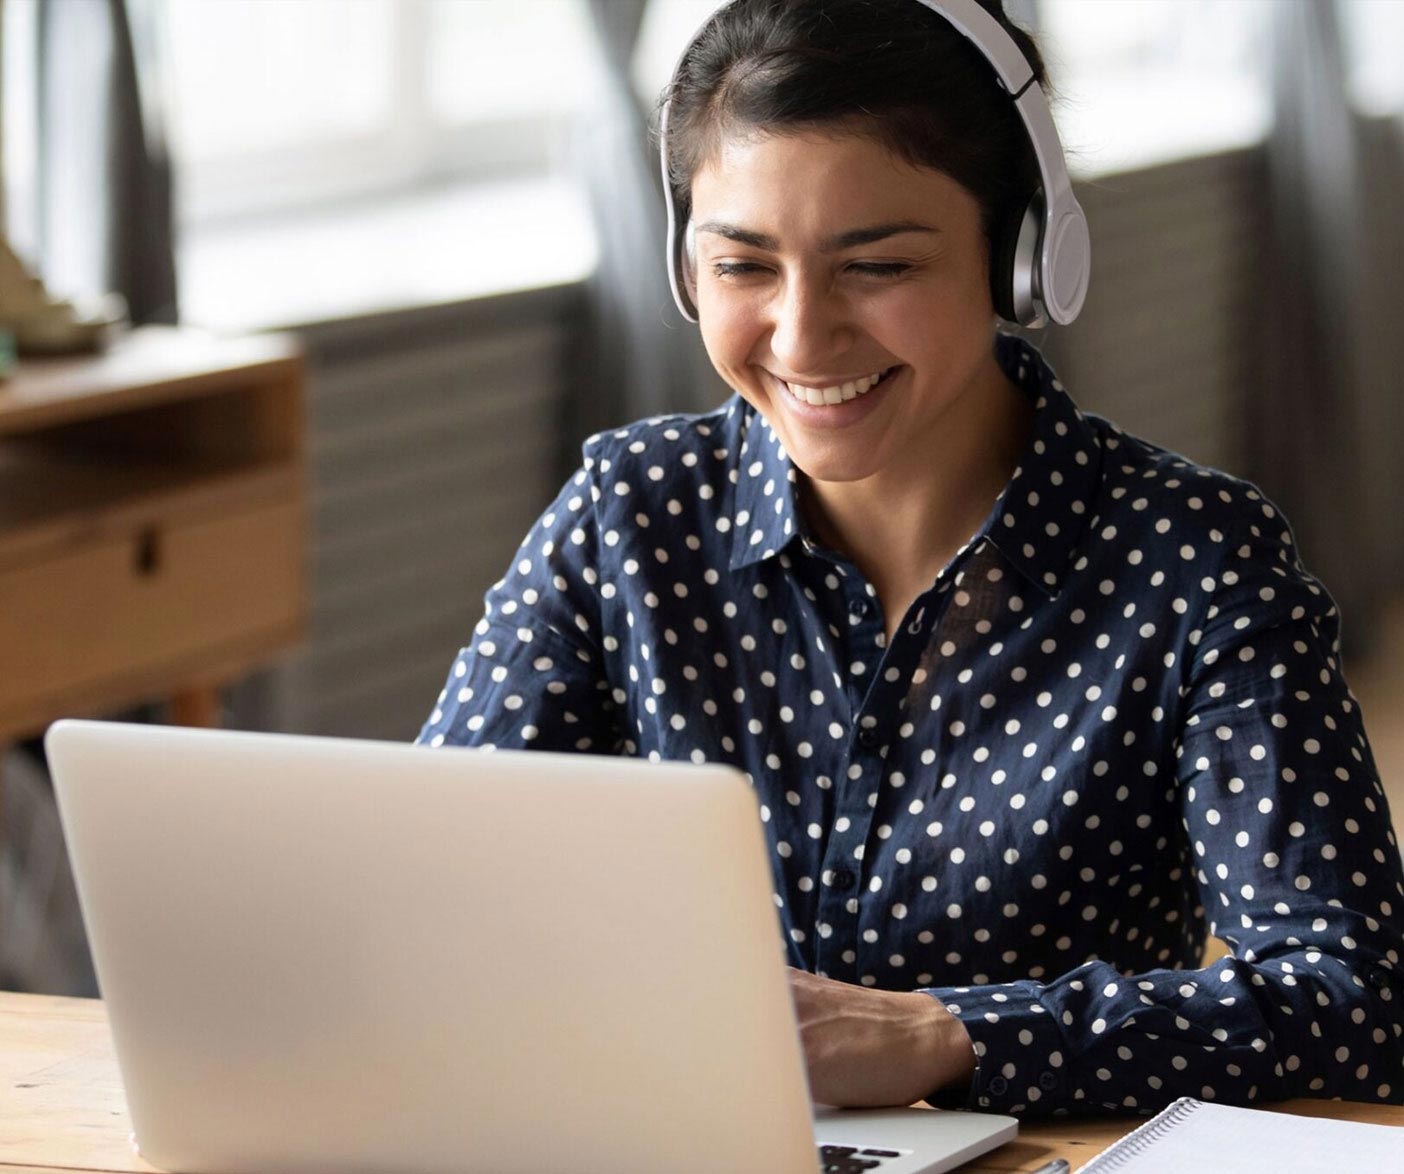 A young woman wearing headphones smiles during a conference call on her laptop.